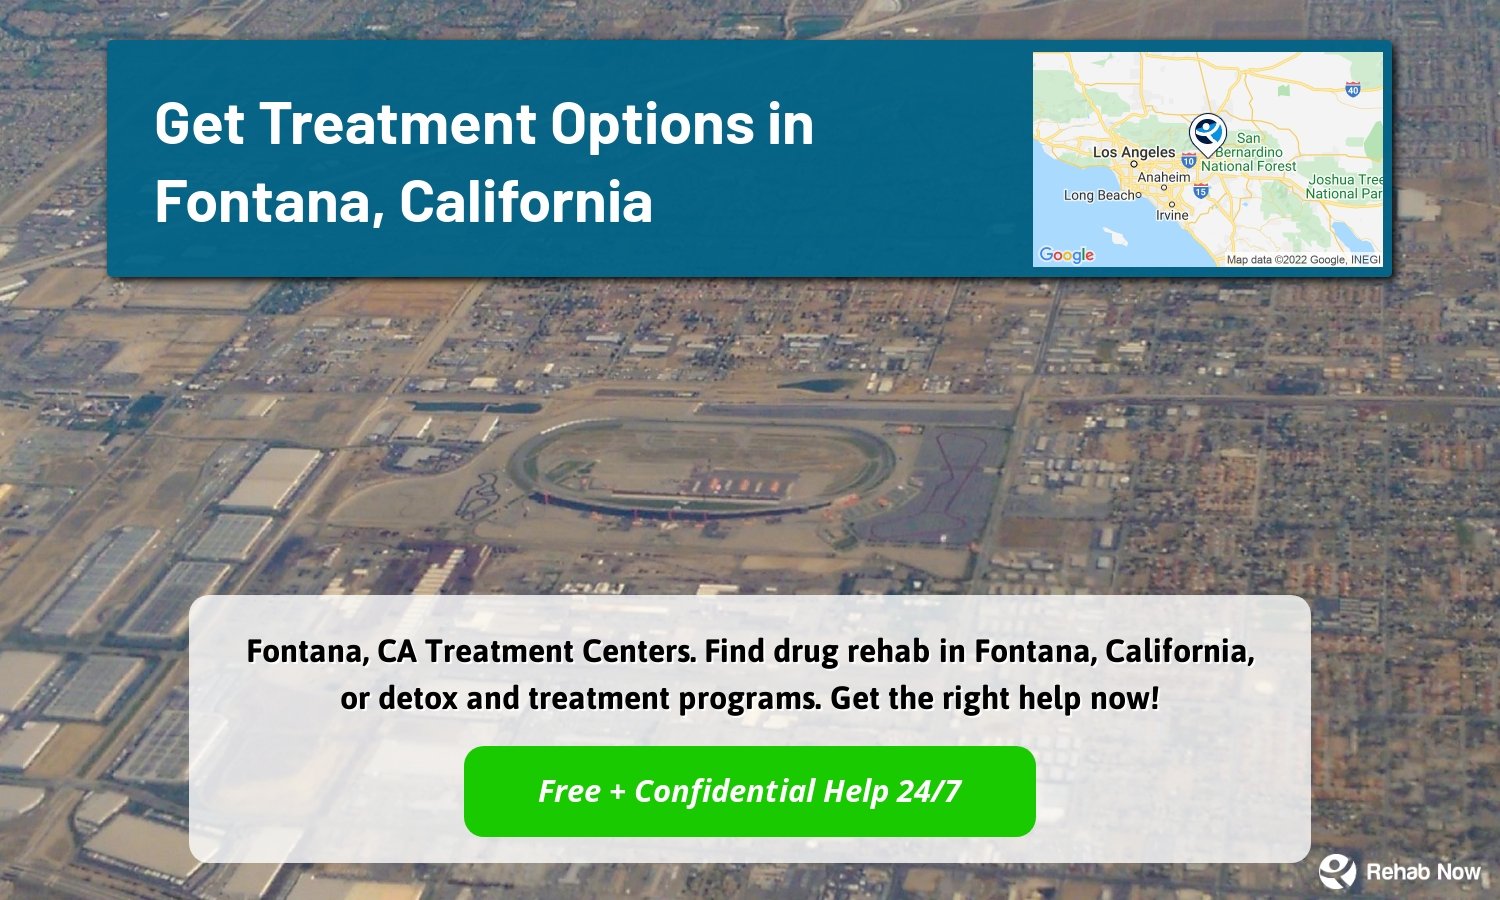 Fontana, CA Treatment Centers. Find drug rehab in Fontana, California, or detox and treatment programs. Get the right help now!